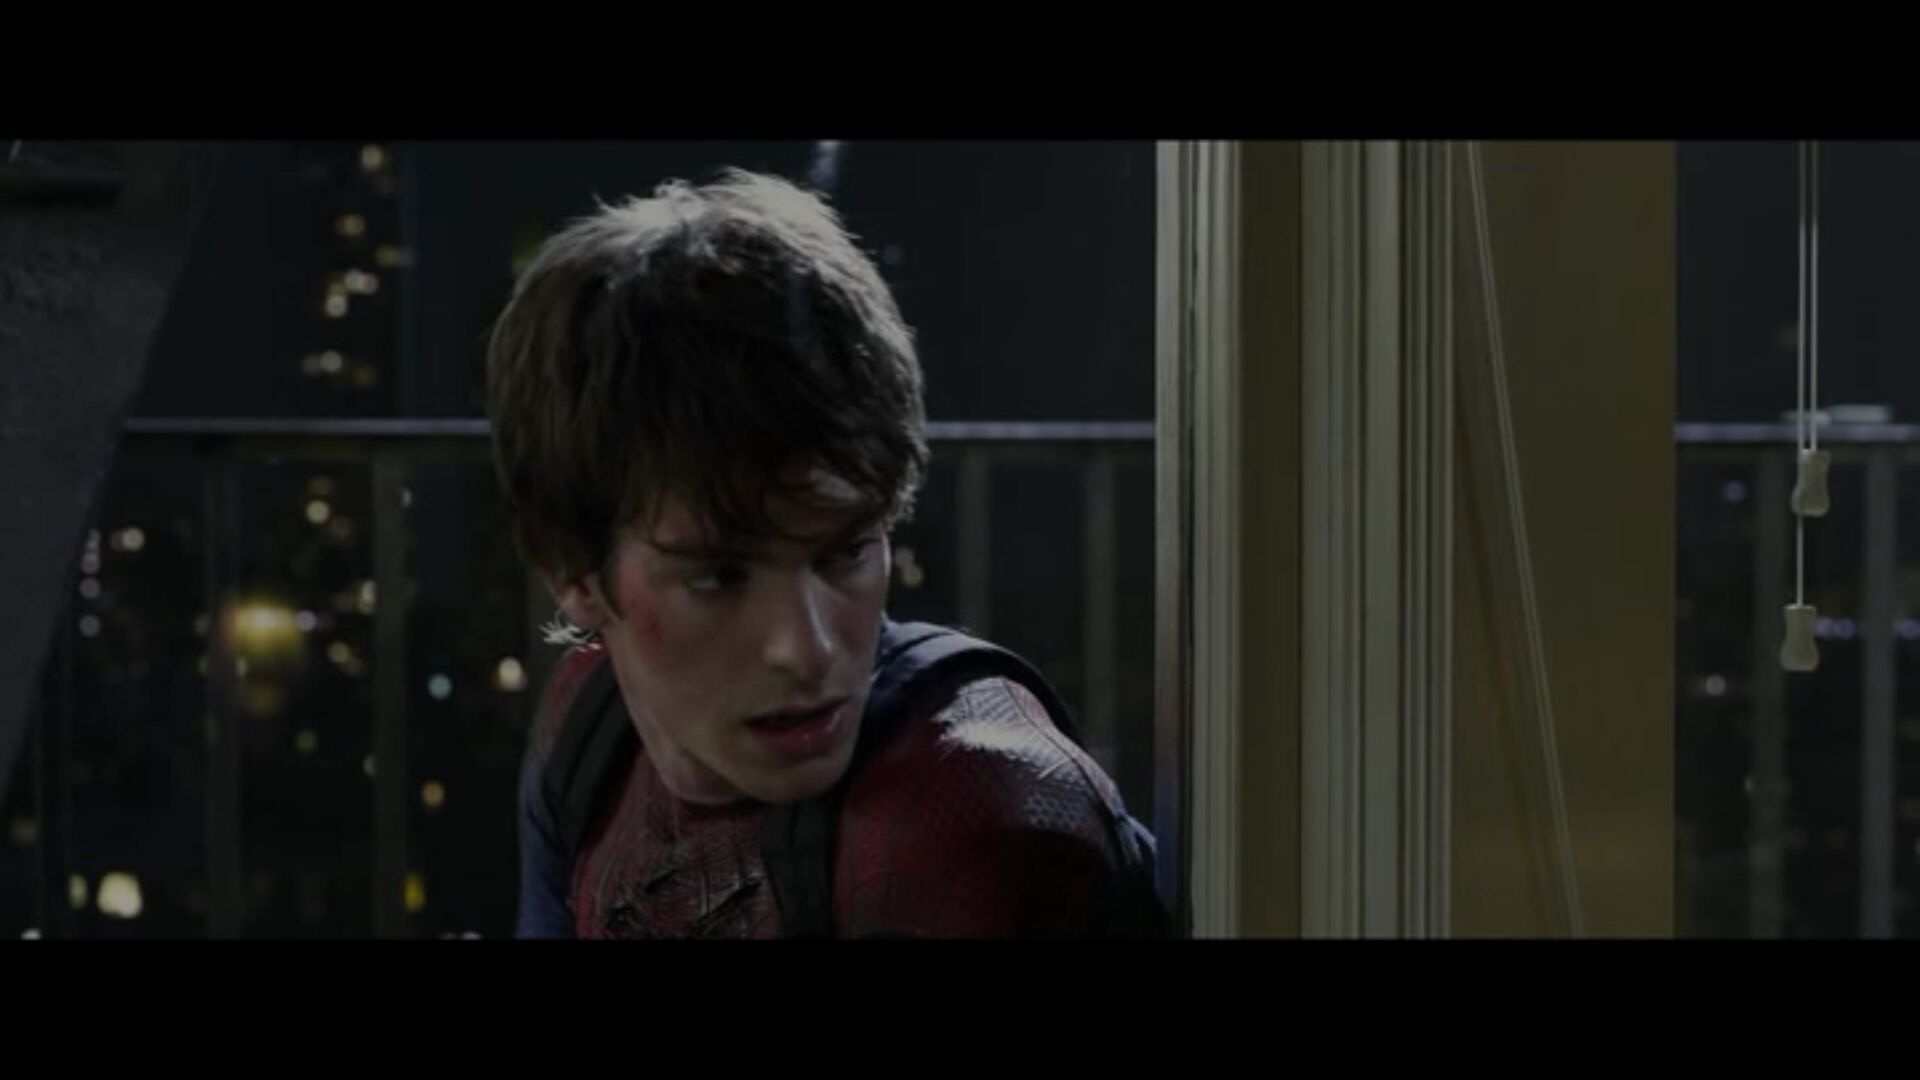 Andrew Garfield in The Amazing Spider-Man